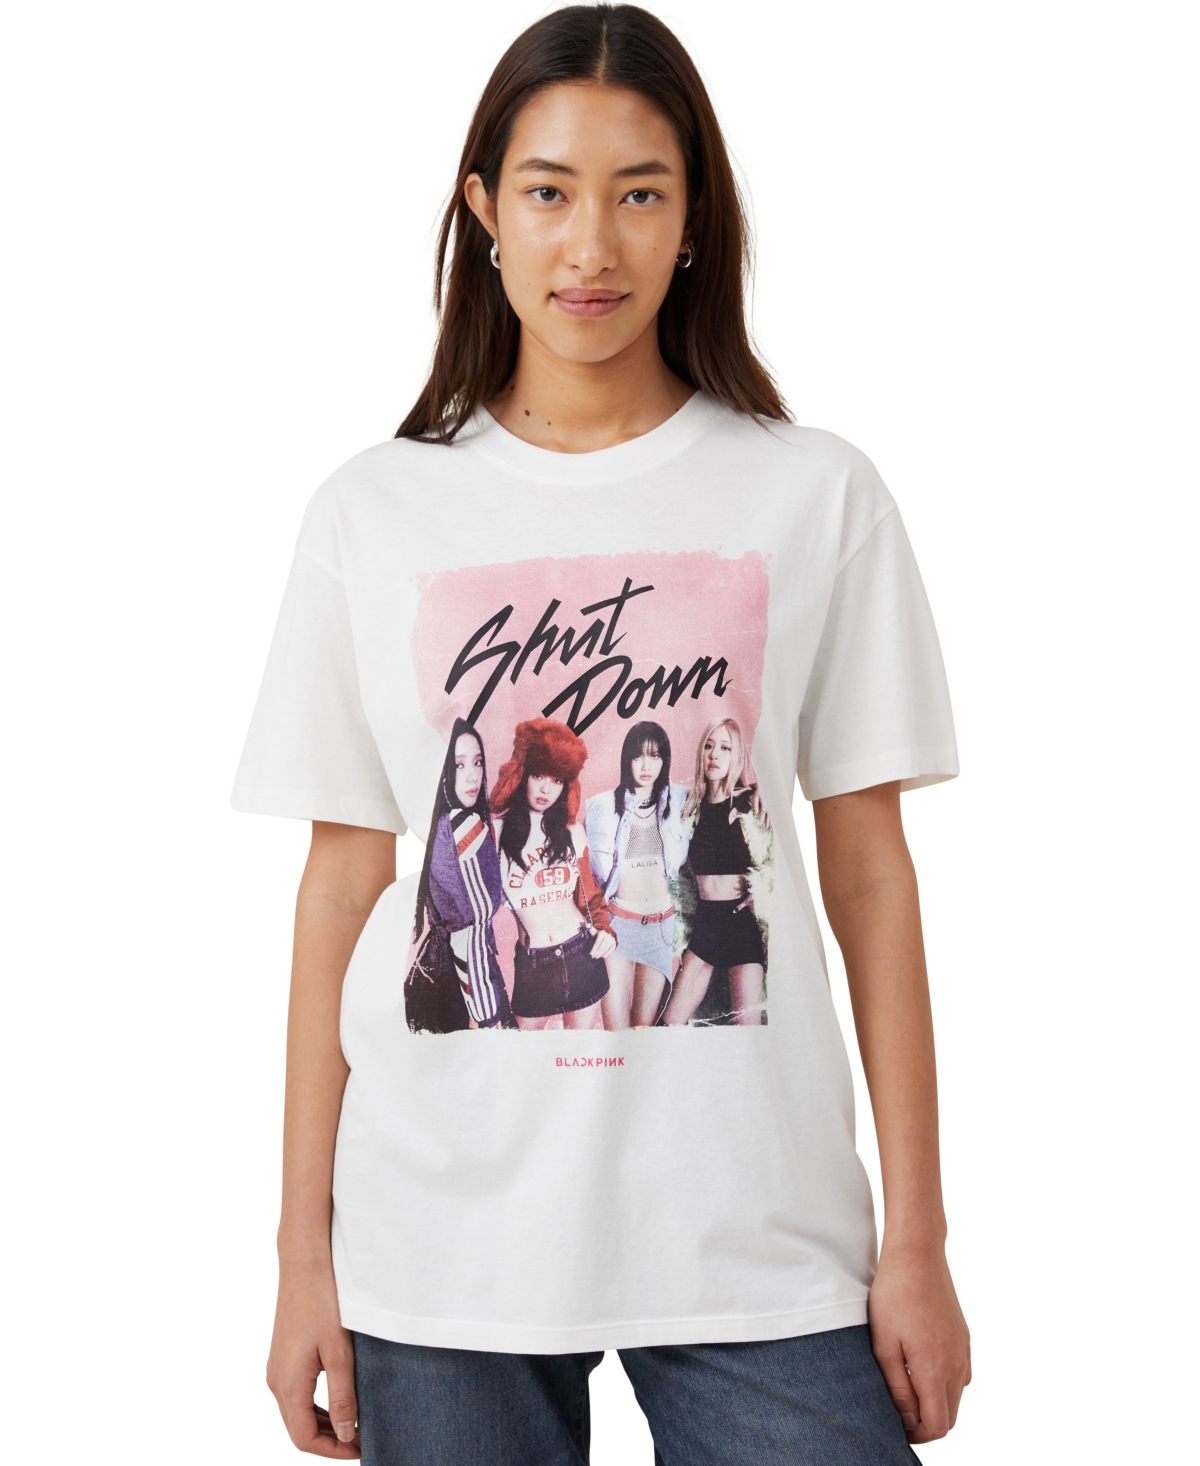 Cotton On Women's The Oversized Graphic License T-shirt In Black Pink Shut Down,vintage White